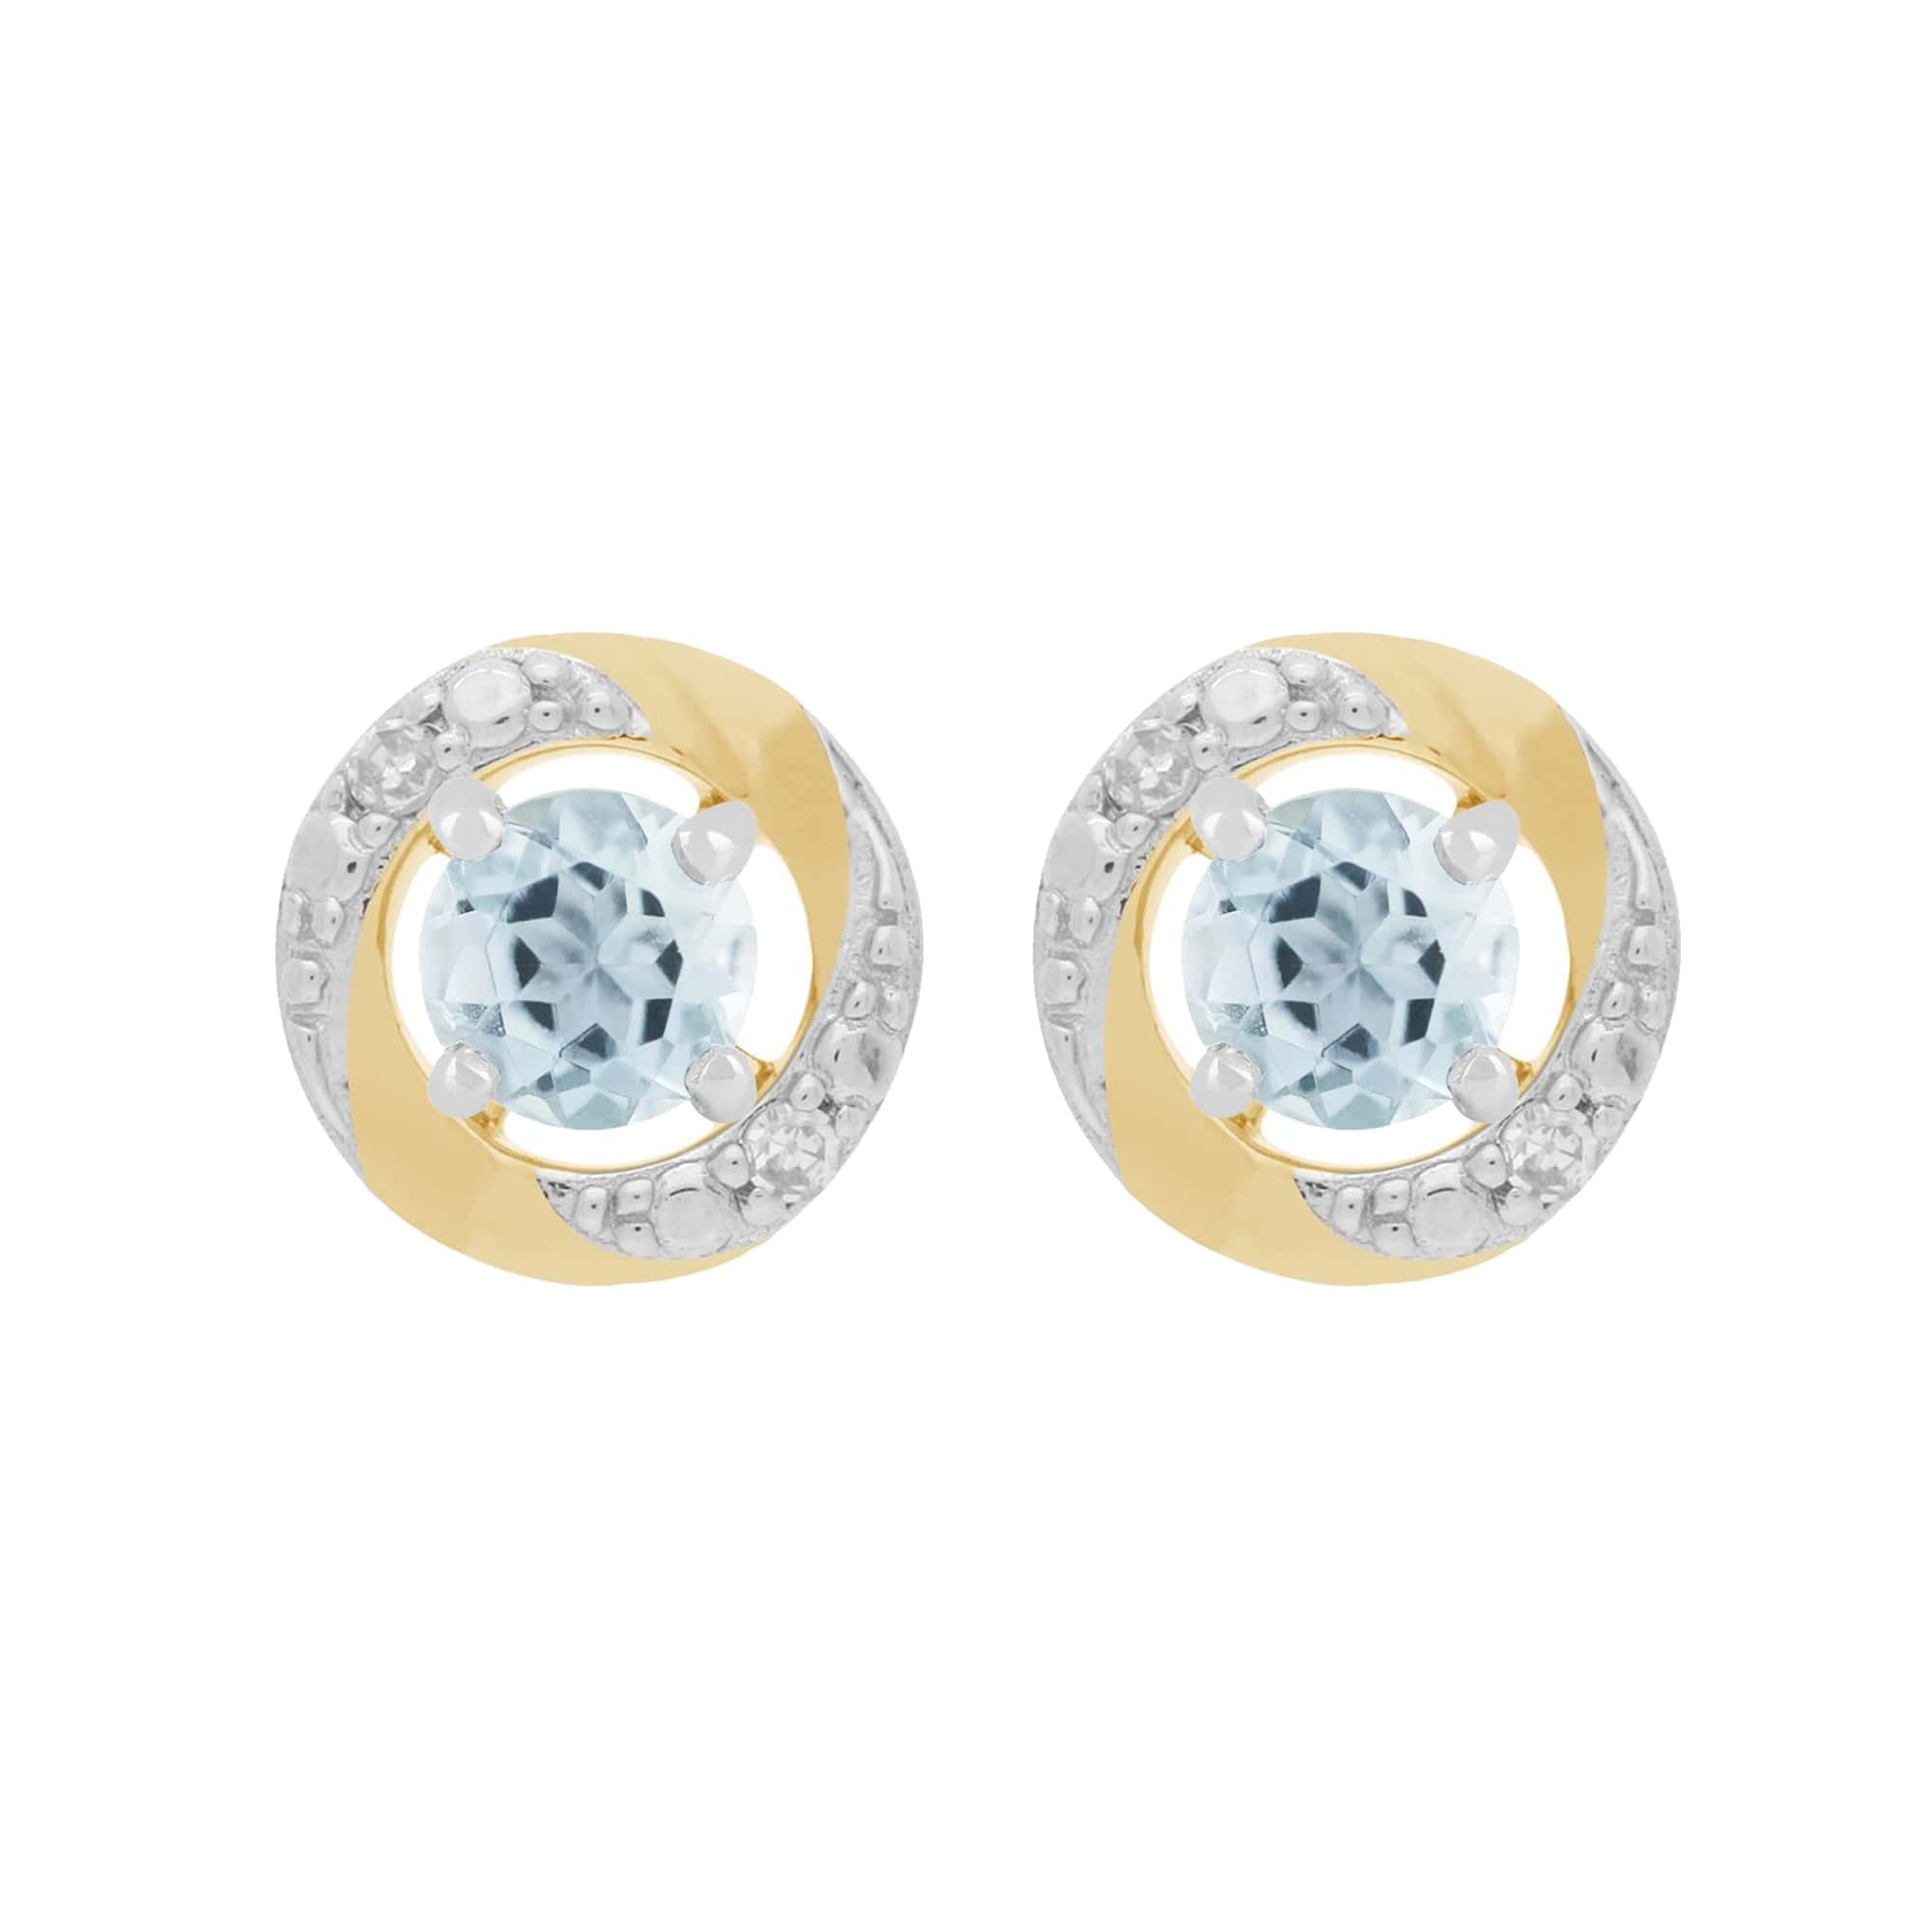 22526-191E0374019 9ct White Gold Aquamarine Stud Earrings with Detachable Diamond Halo Ear Jacket in 9ct Yellow Gold 1